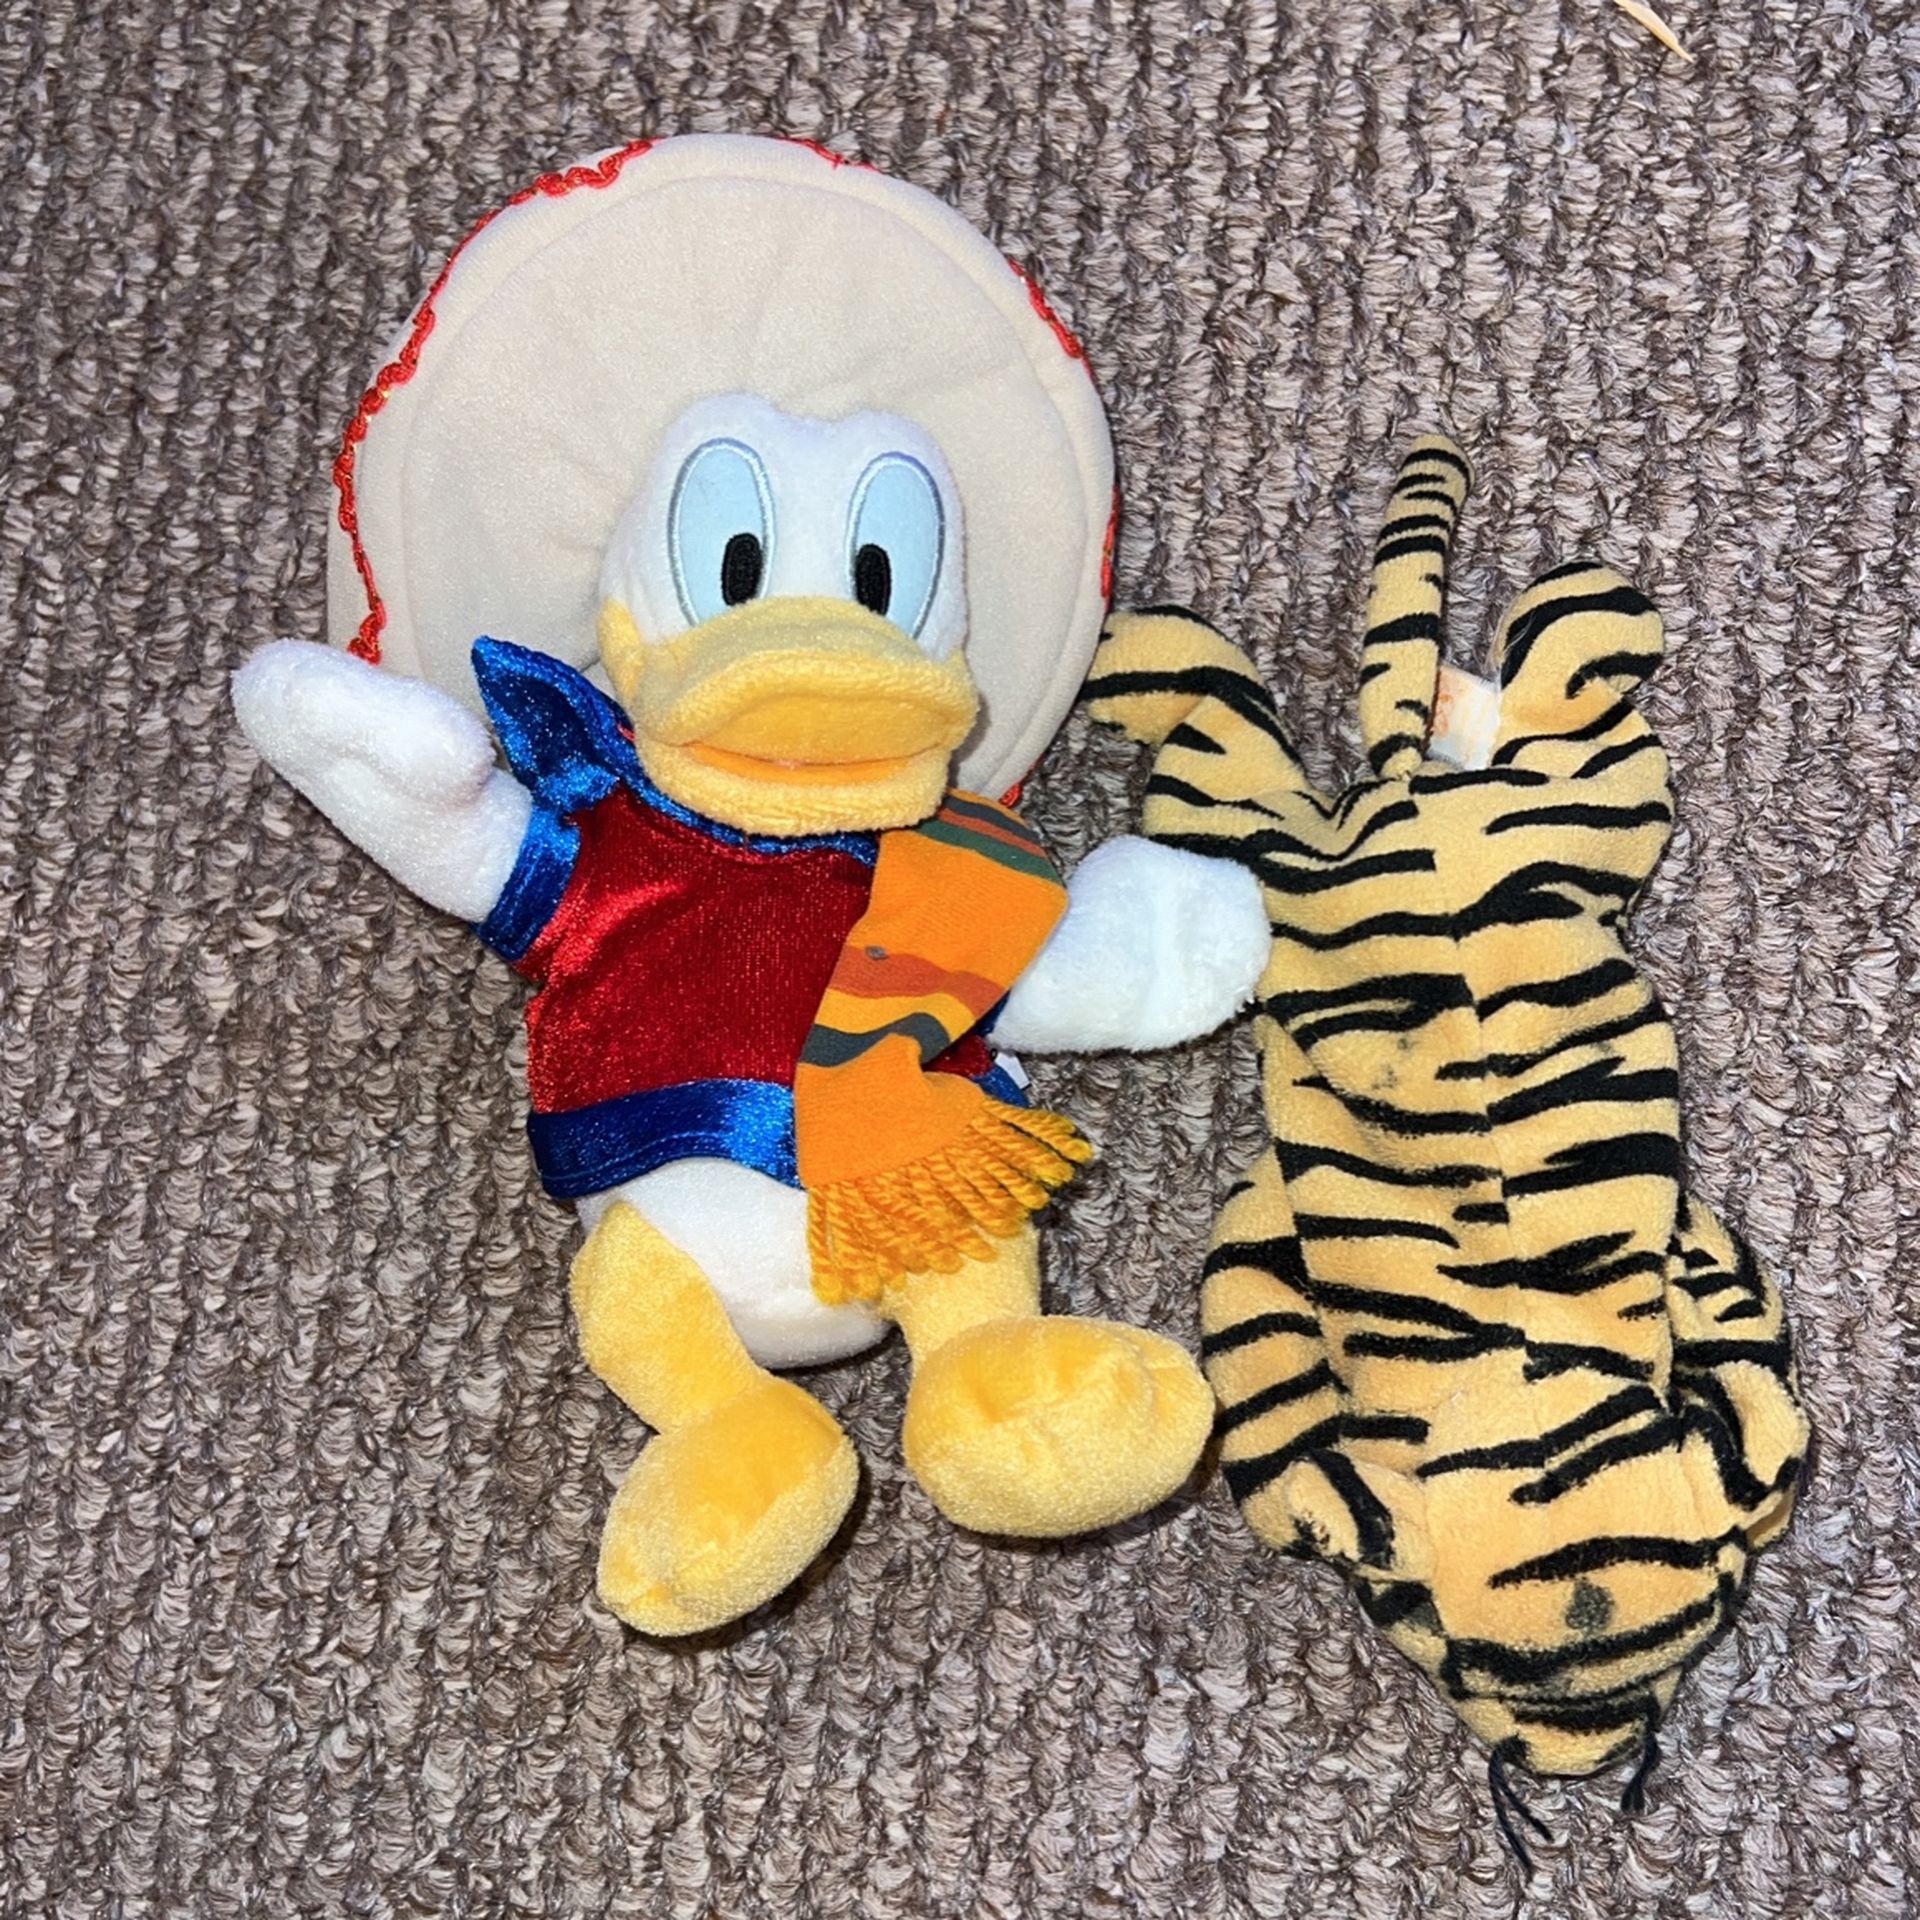 Stuffed Animals (Disney Character And A Tiger) 